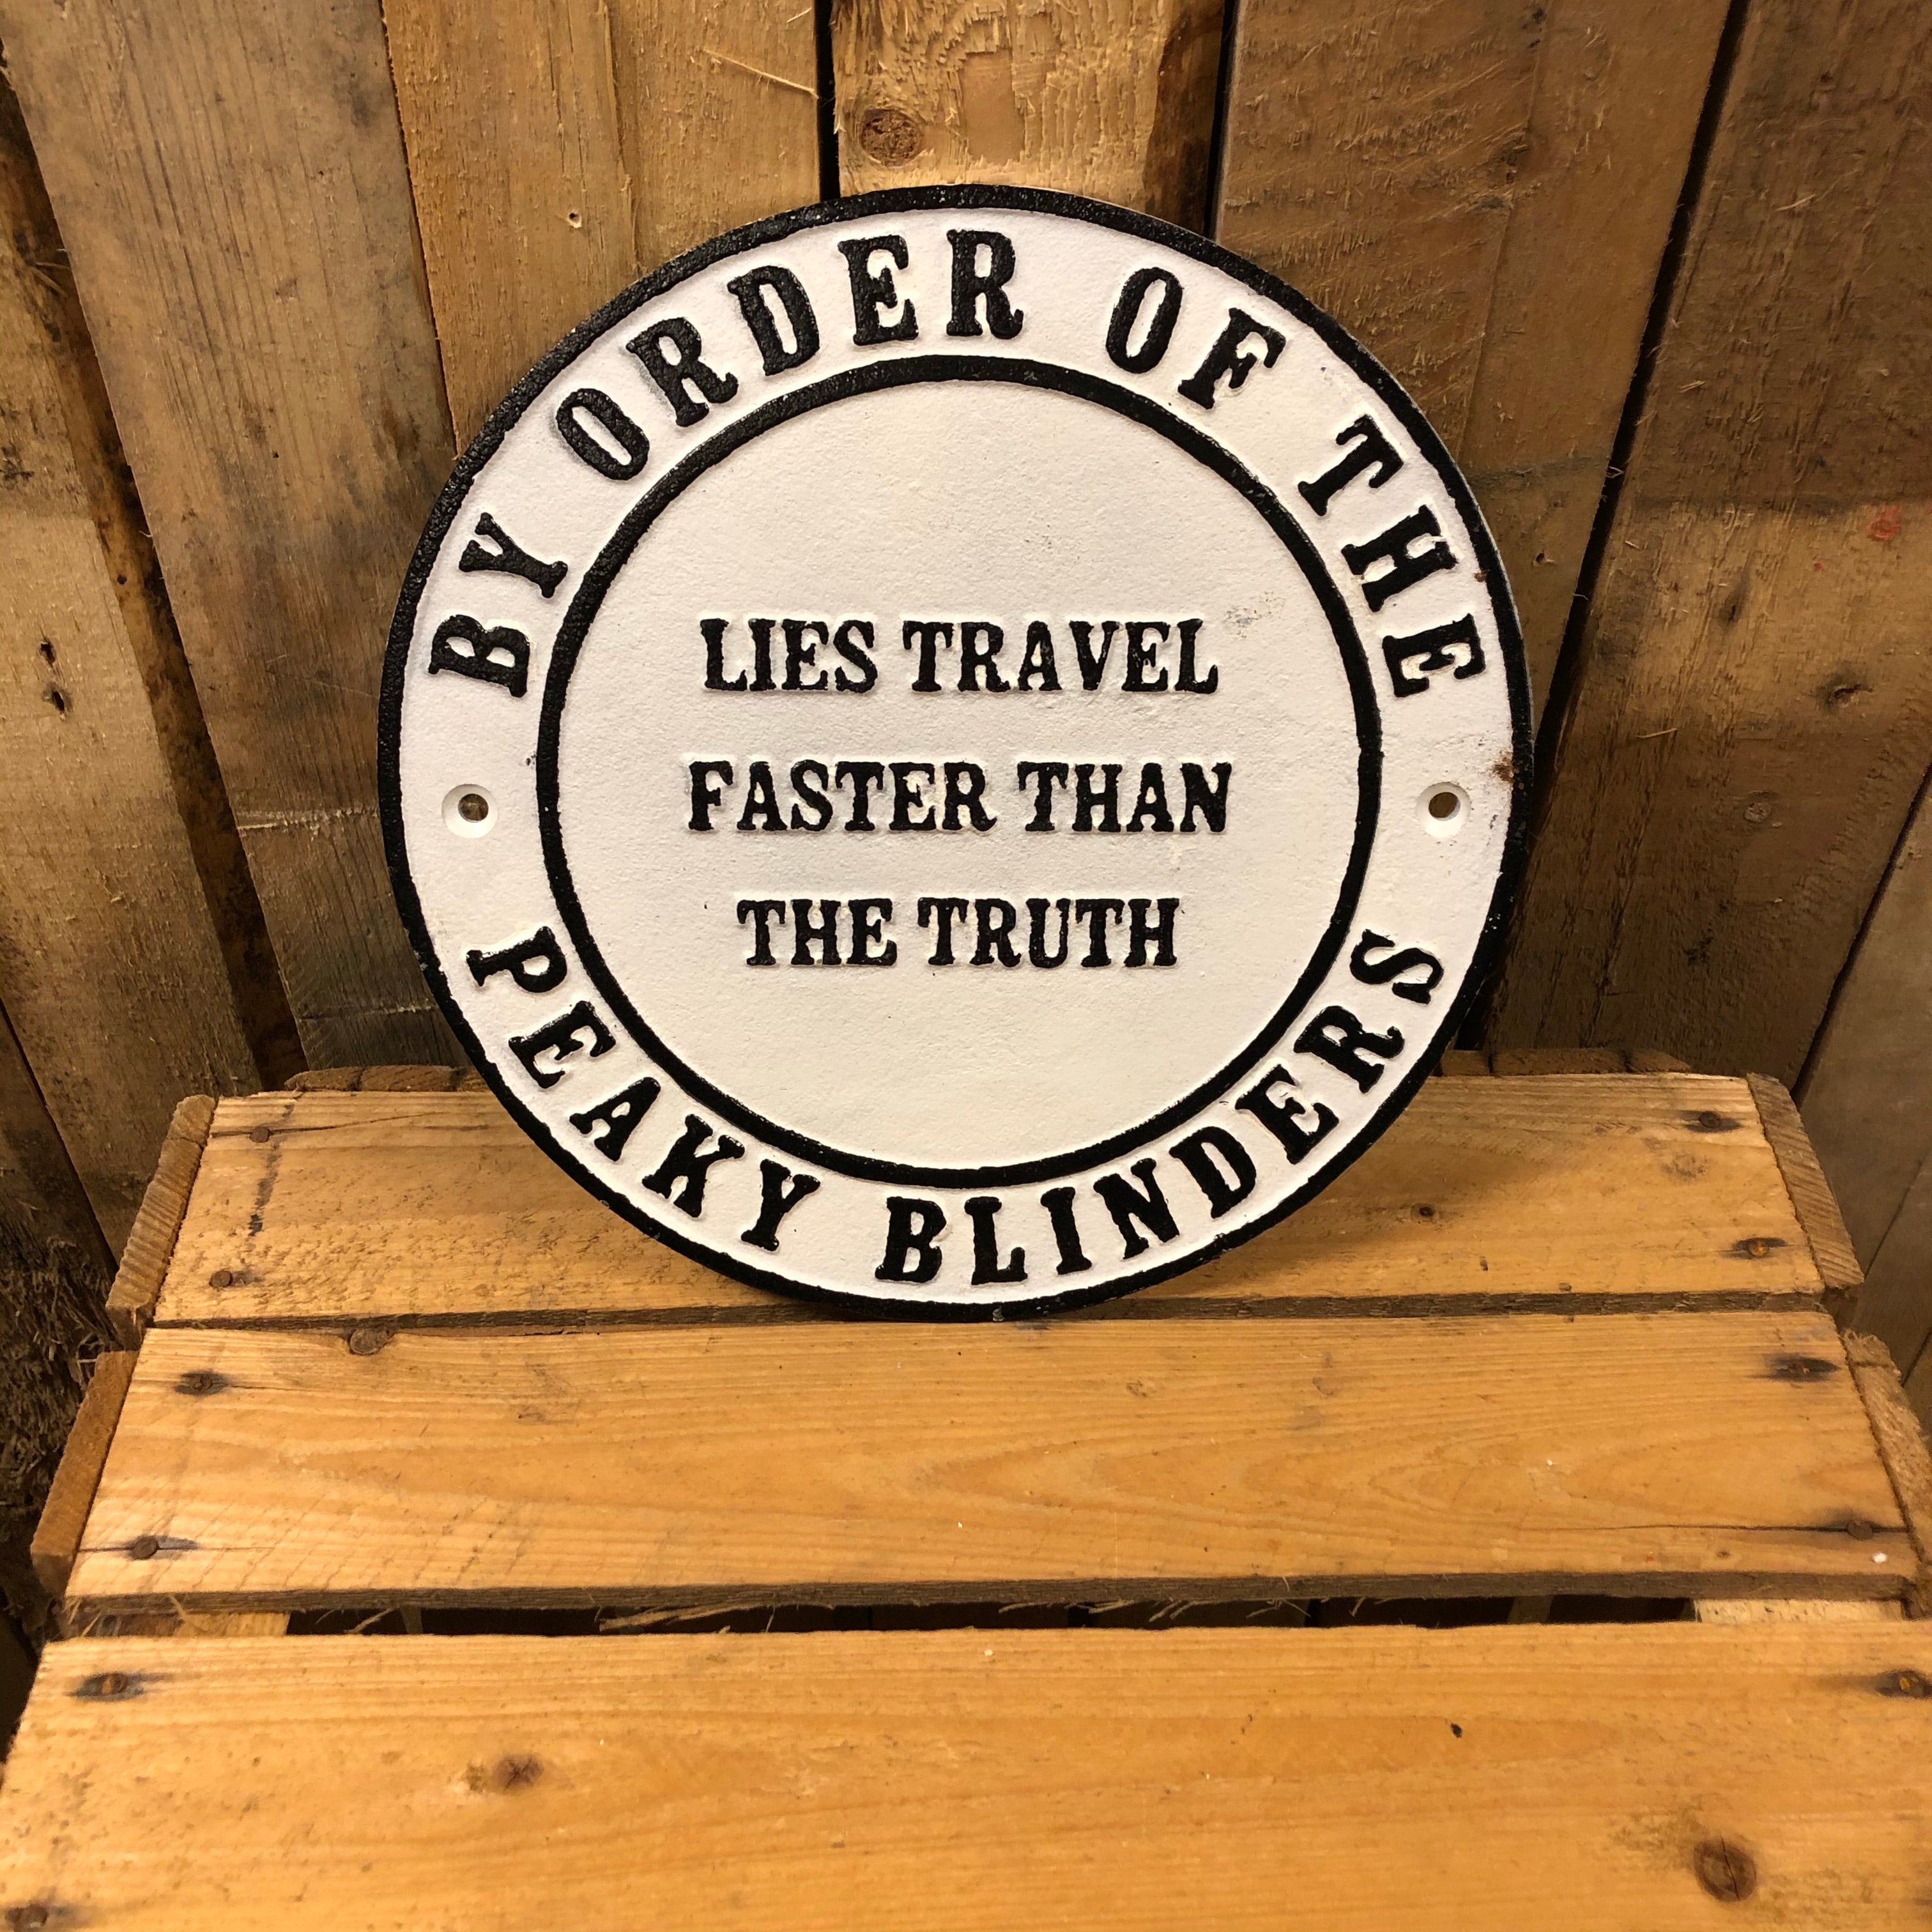 Peaky blinders heavy cast iron sign Lies travel faster than the truth